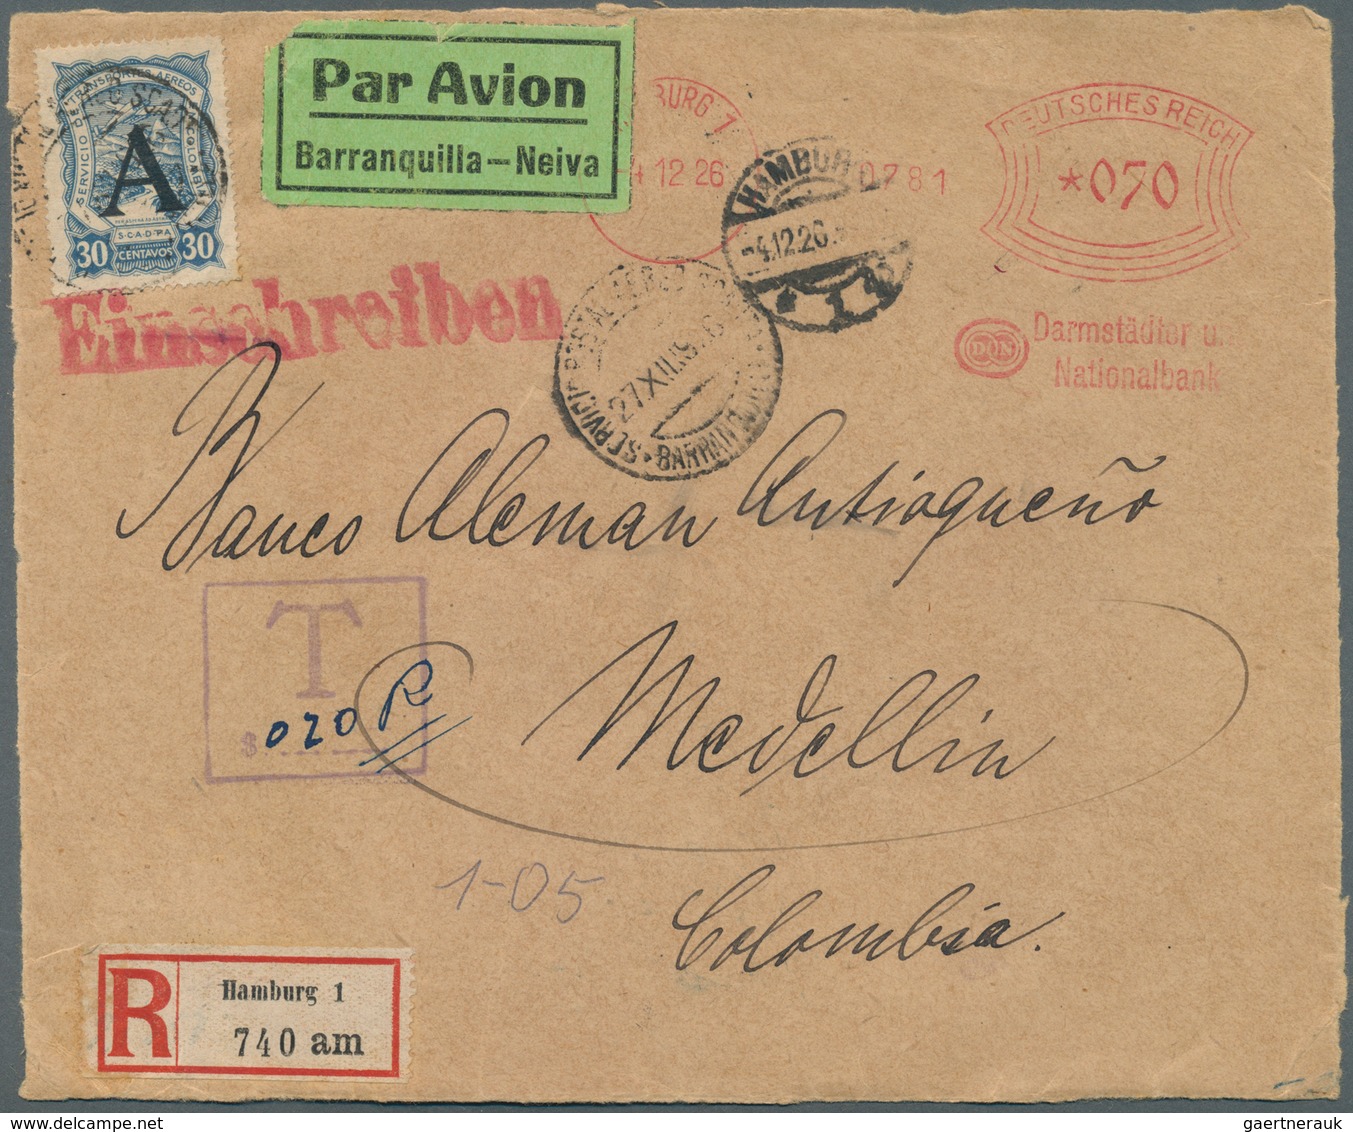 SCADTA - Länder-Aufdrucke: 1928 SCADTA Registered Airmail Germany-Colombia And Colombia-Germany, Wit - Avions